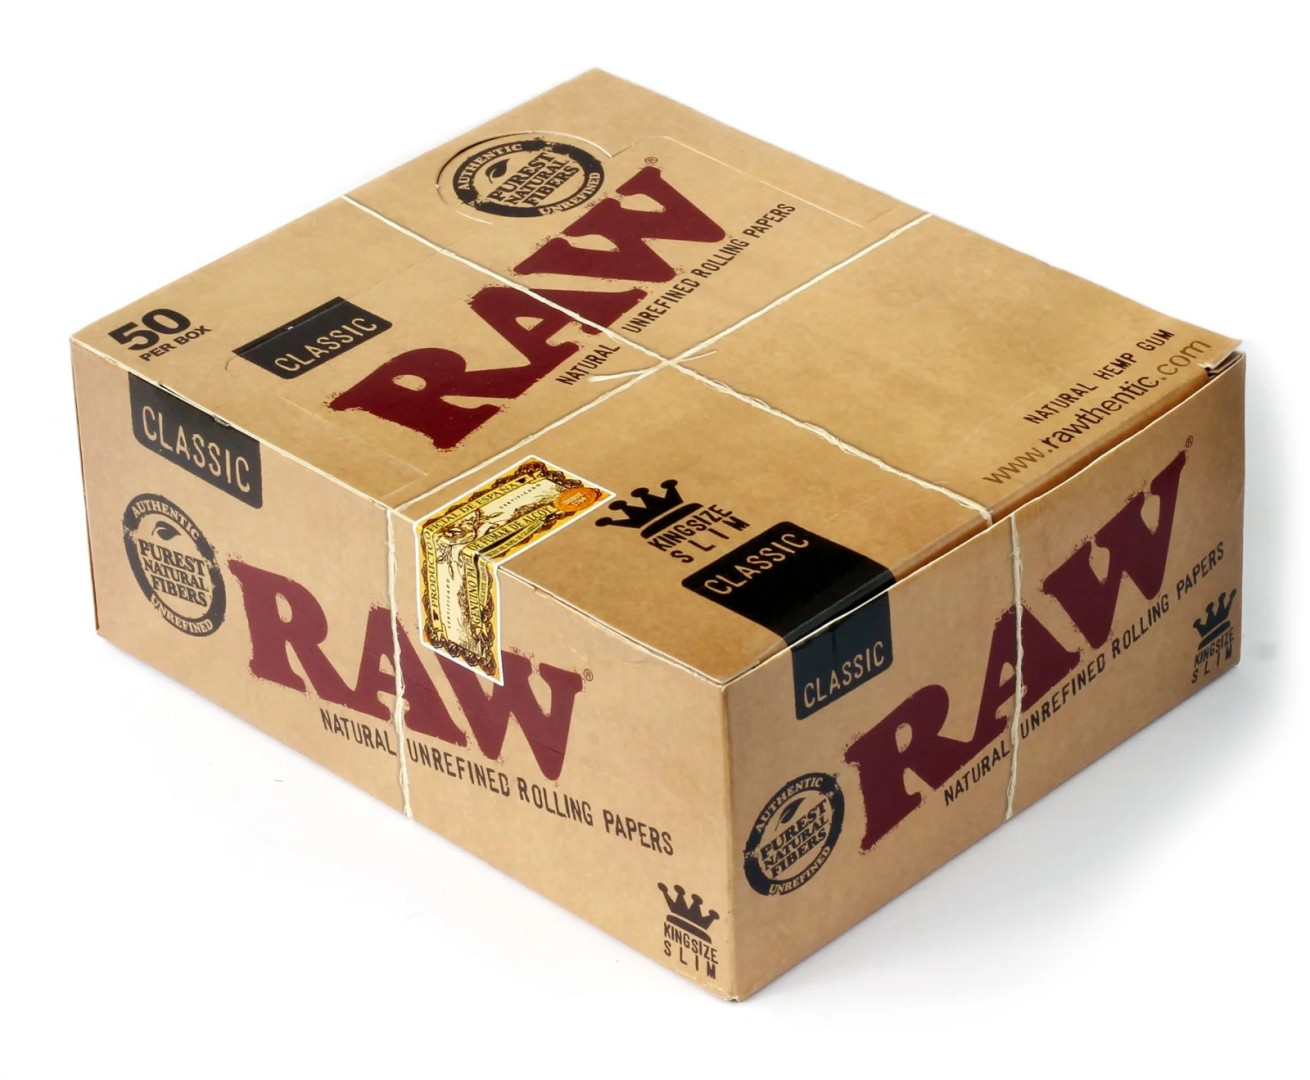 RAW Rolling Papers King Size Slim Classic 32 Leaves Per Pack - 50 Packs Per Box